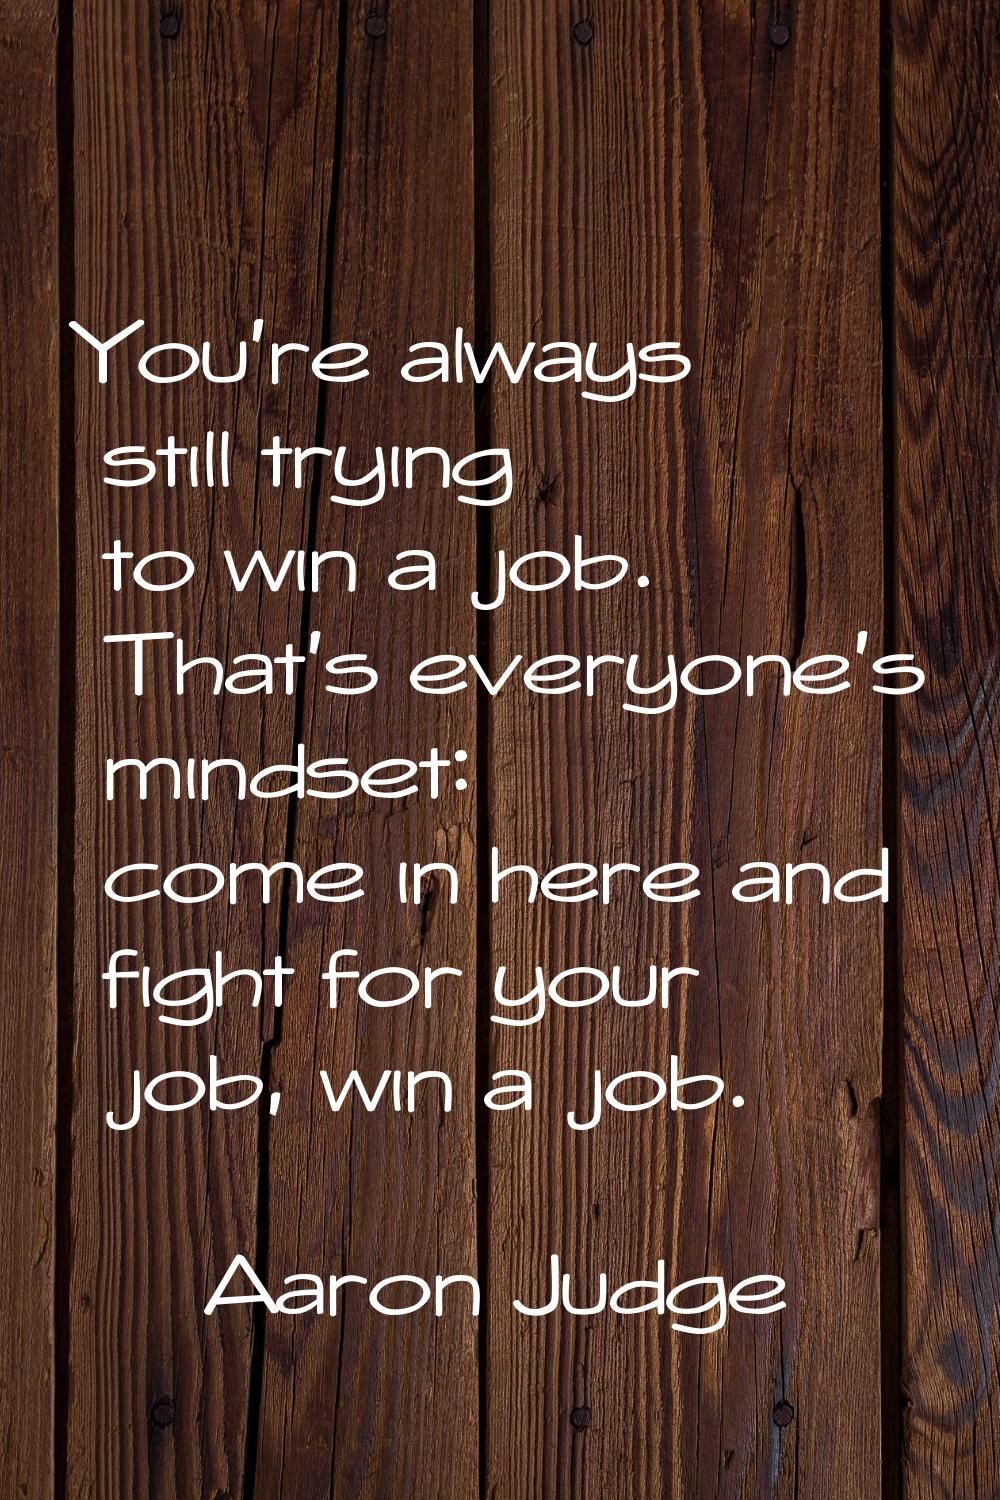 You're always still trying to win a job. That's everyone's mindset: come in here and fight for your